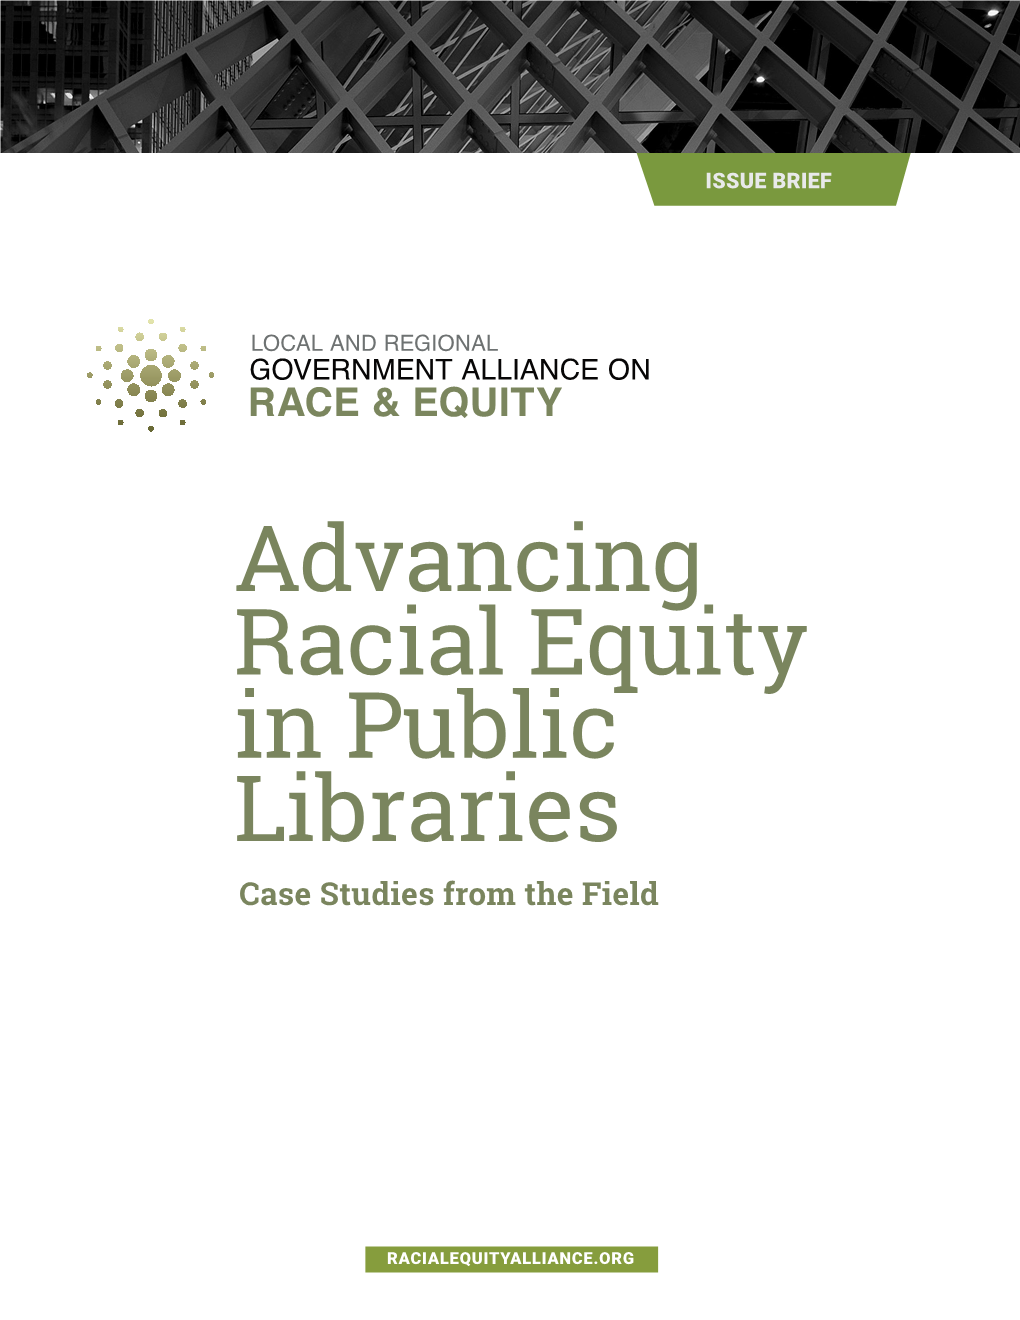 Advancing Racial Equity in Public Libraries Case Studies from the Field